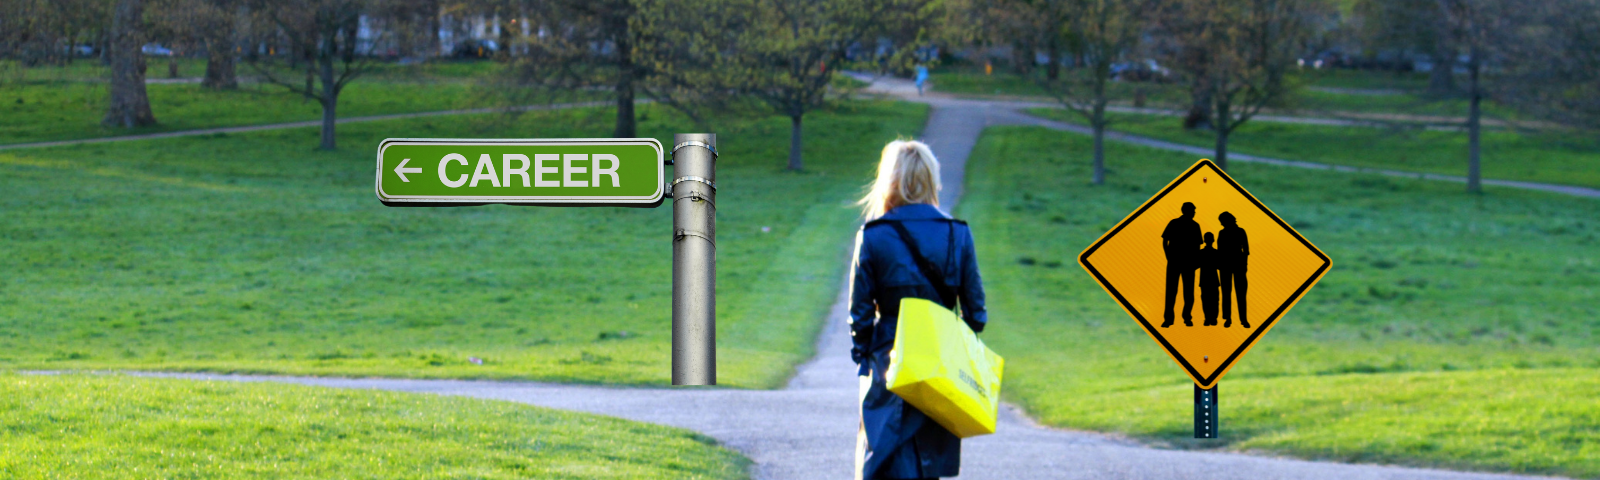 Woman walking alone in a sunny park on crossroads, left signpost says “Career”, right signpost has image of a family